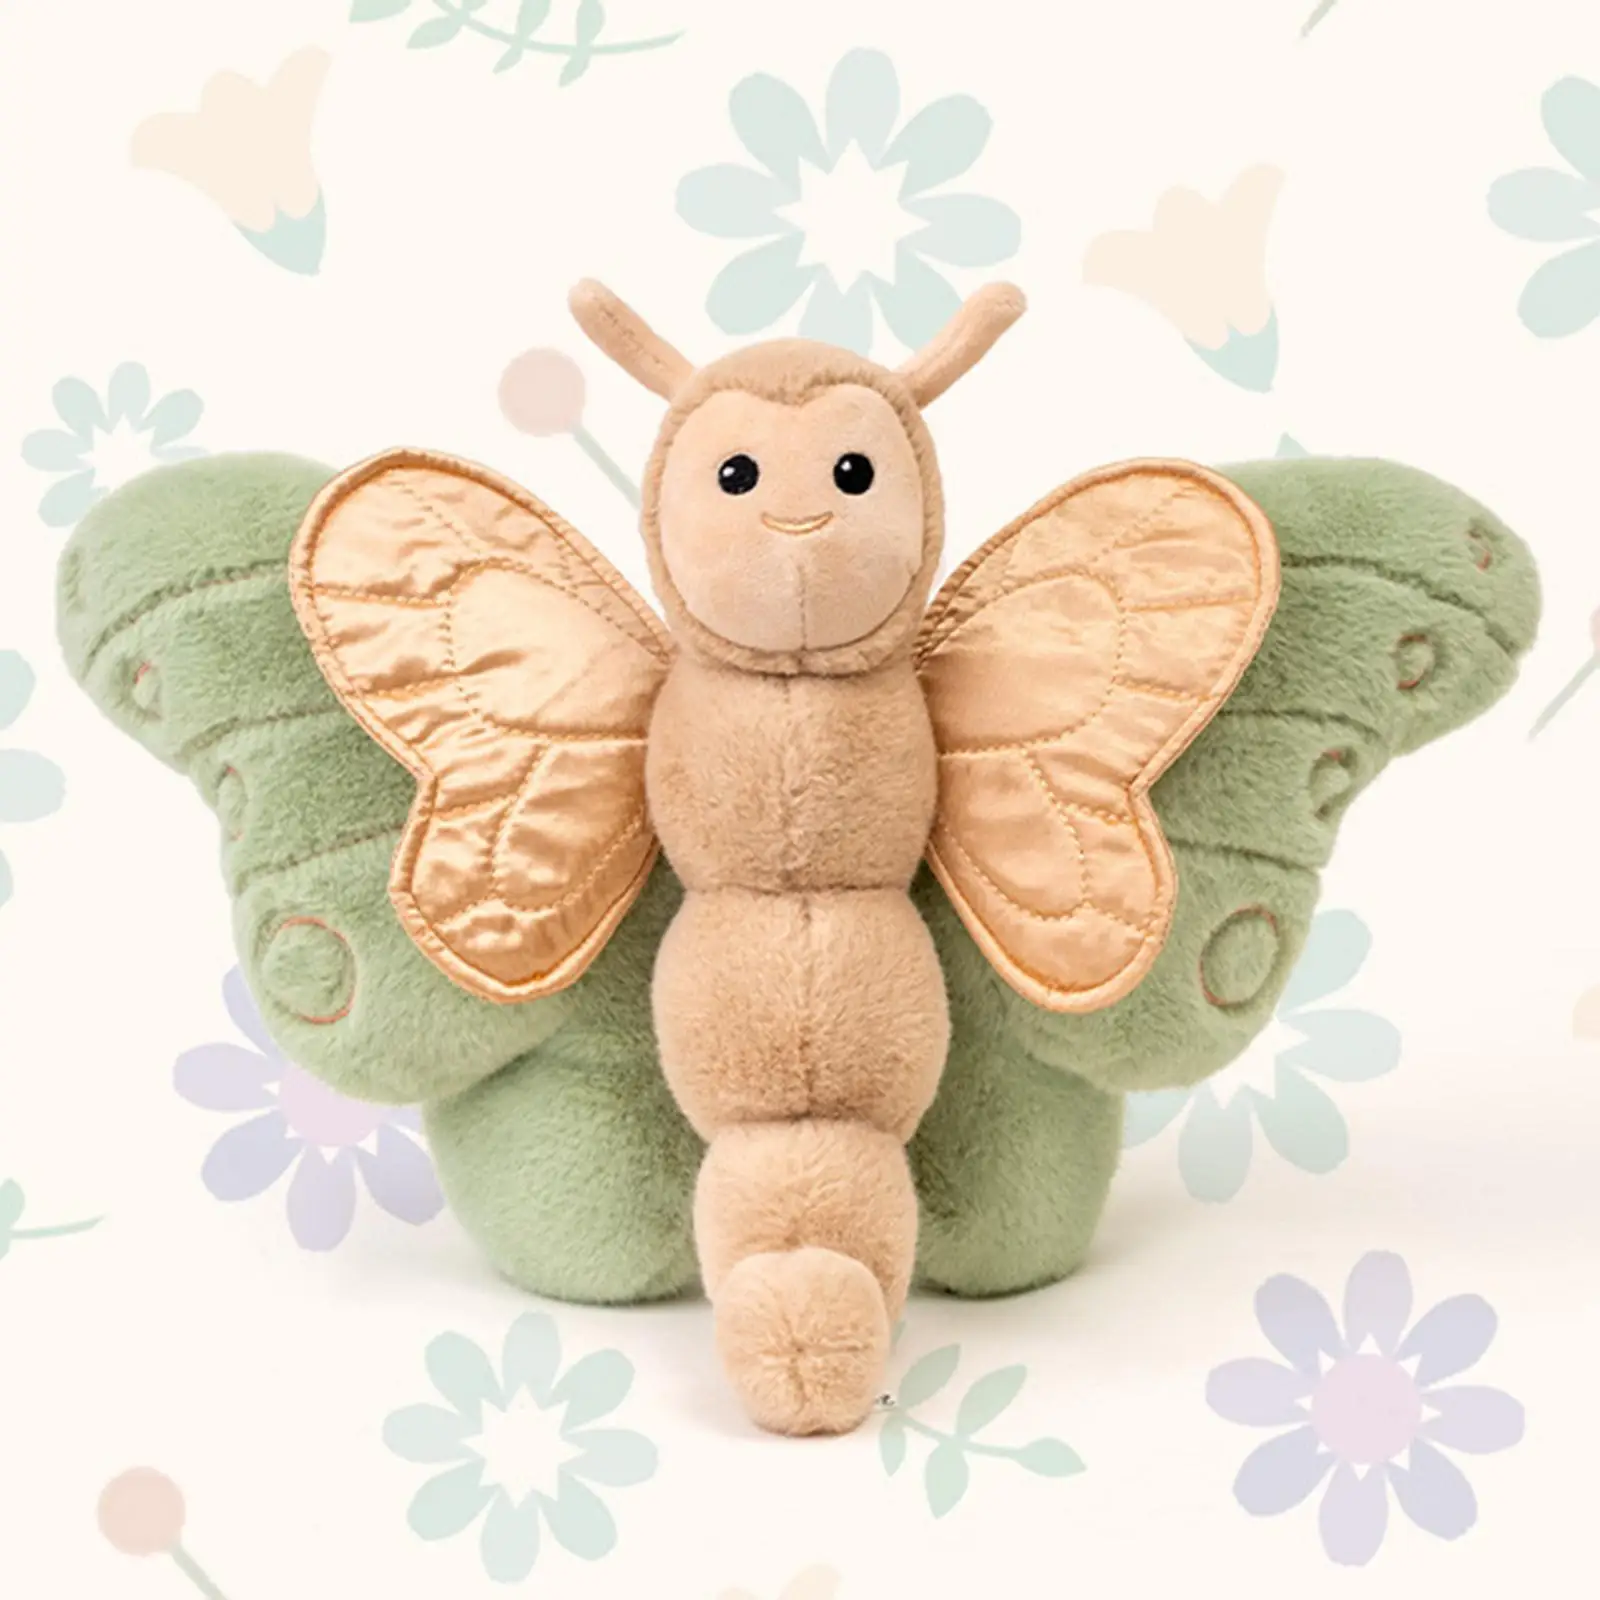 Plush Butterfly Toy Cushion Soothing Pillow Throw Pillows for Car Ornament